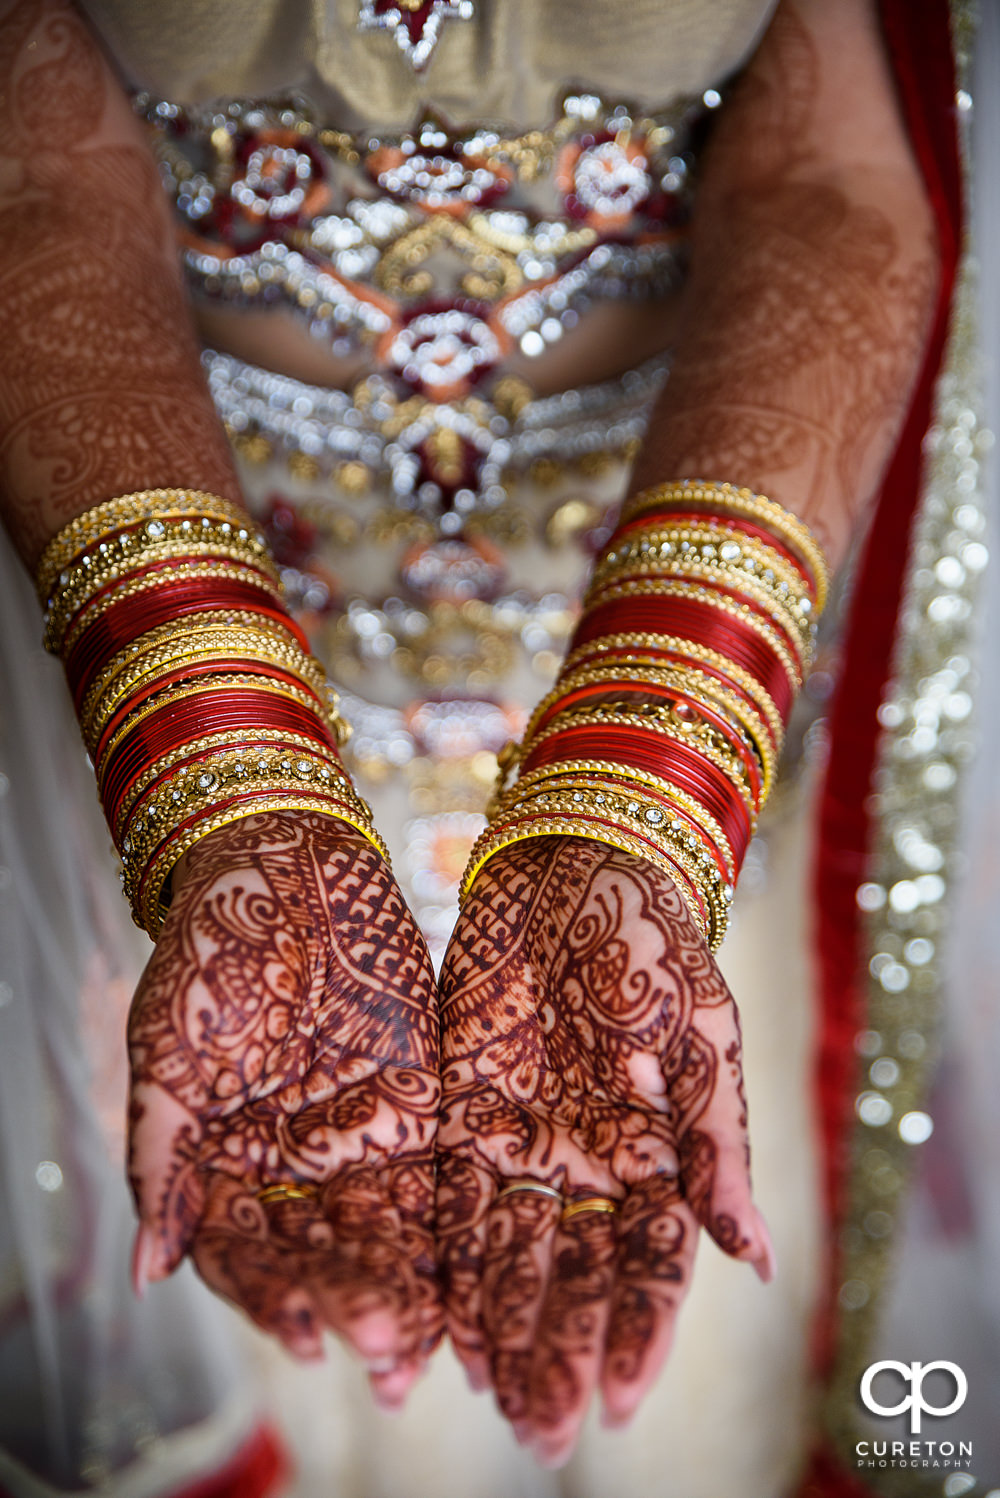 Indian bride getting ready for her wedding.